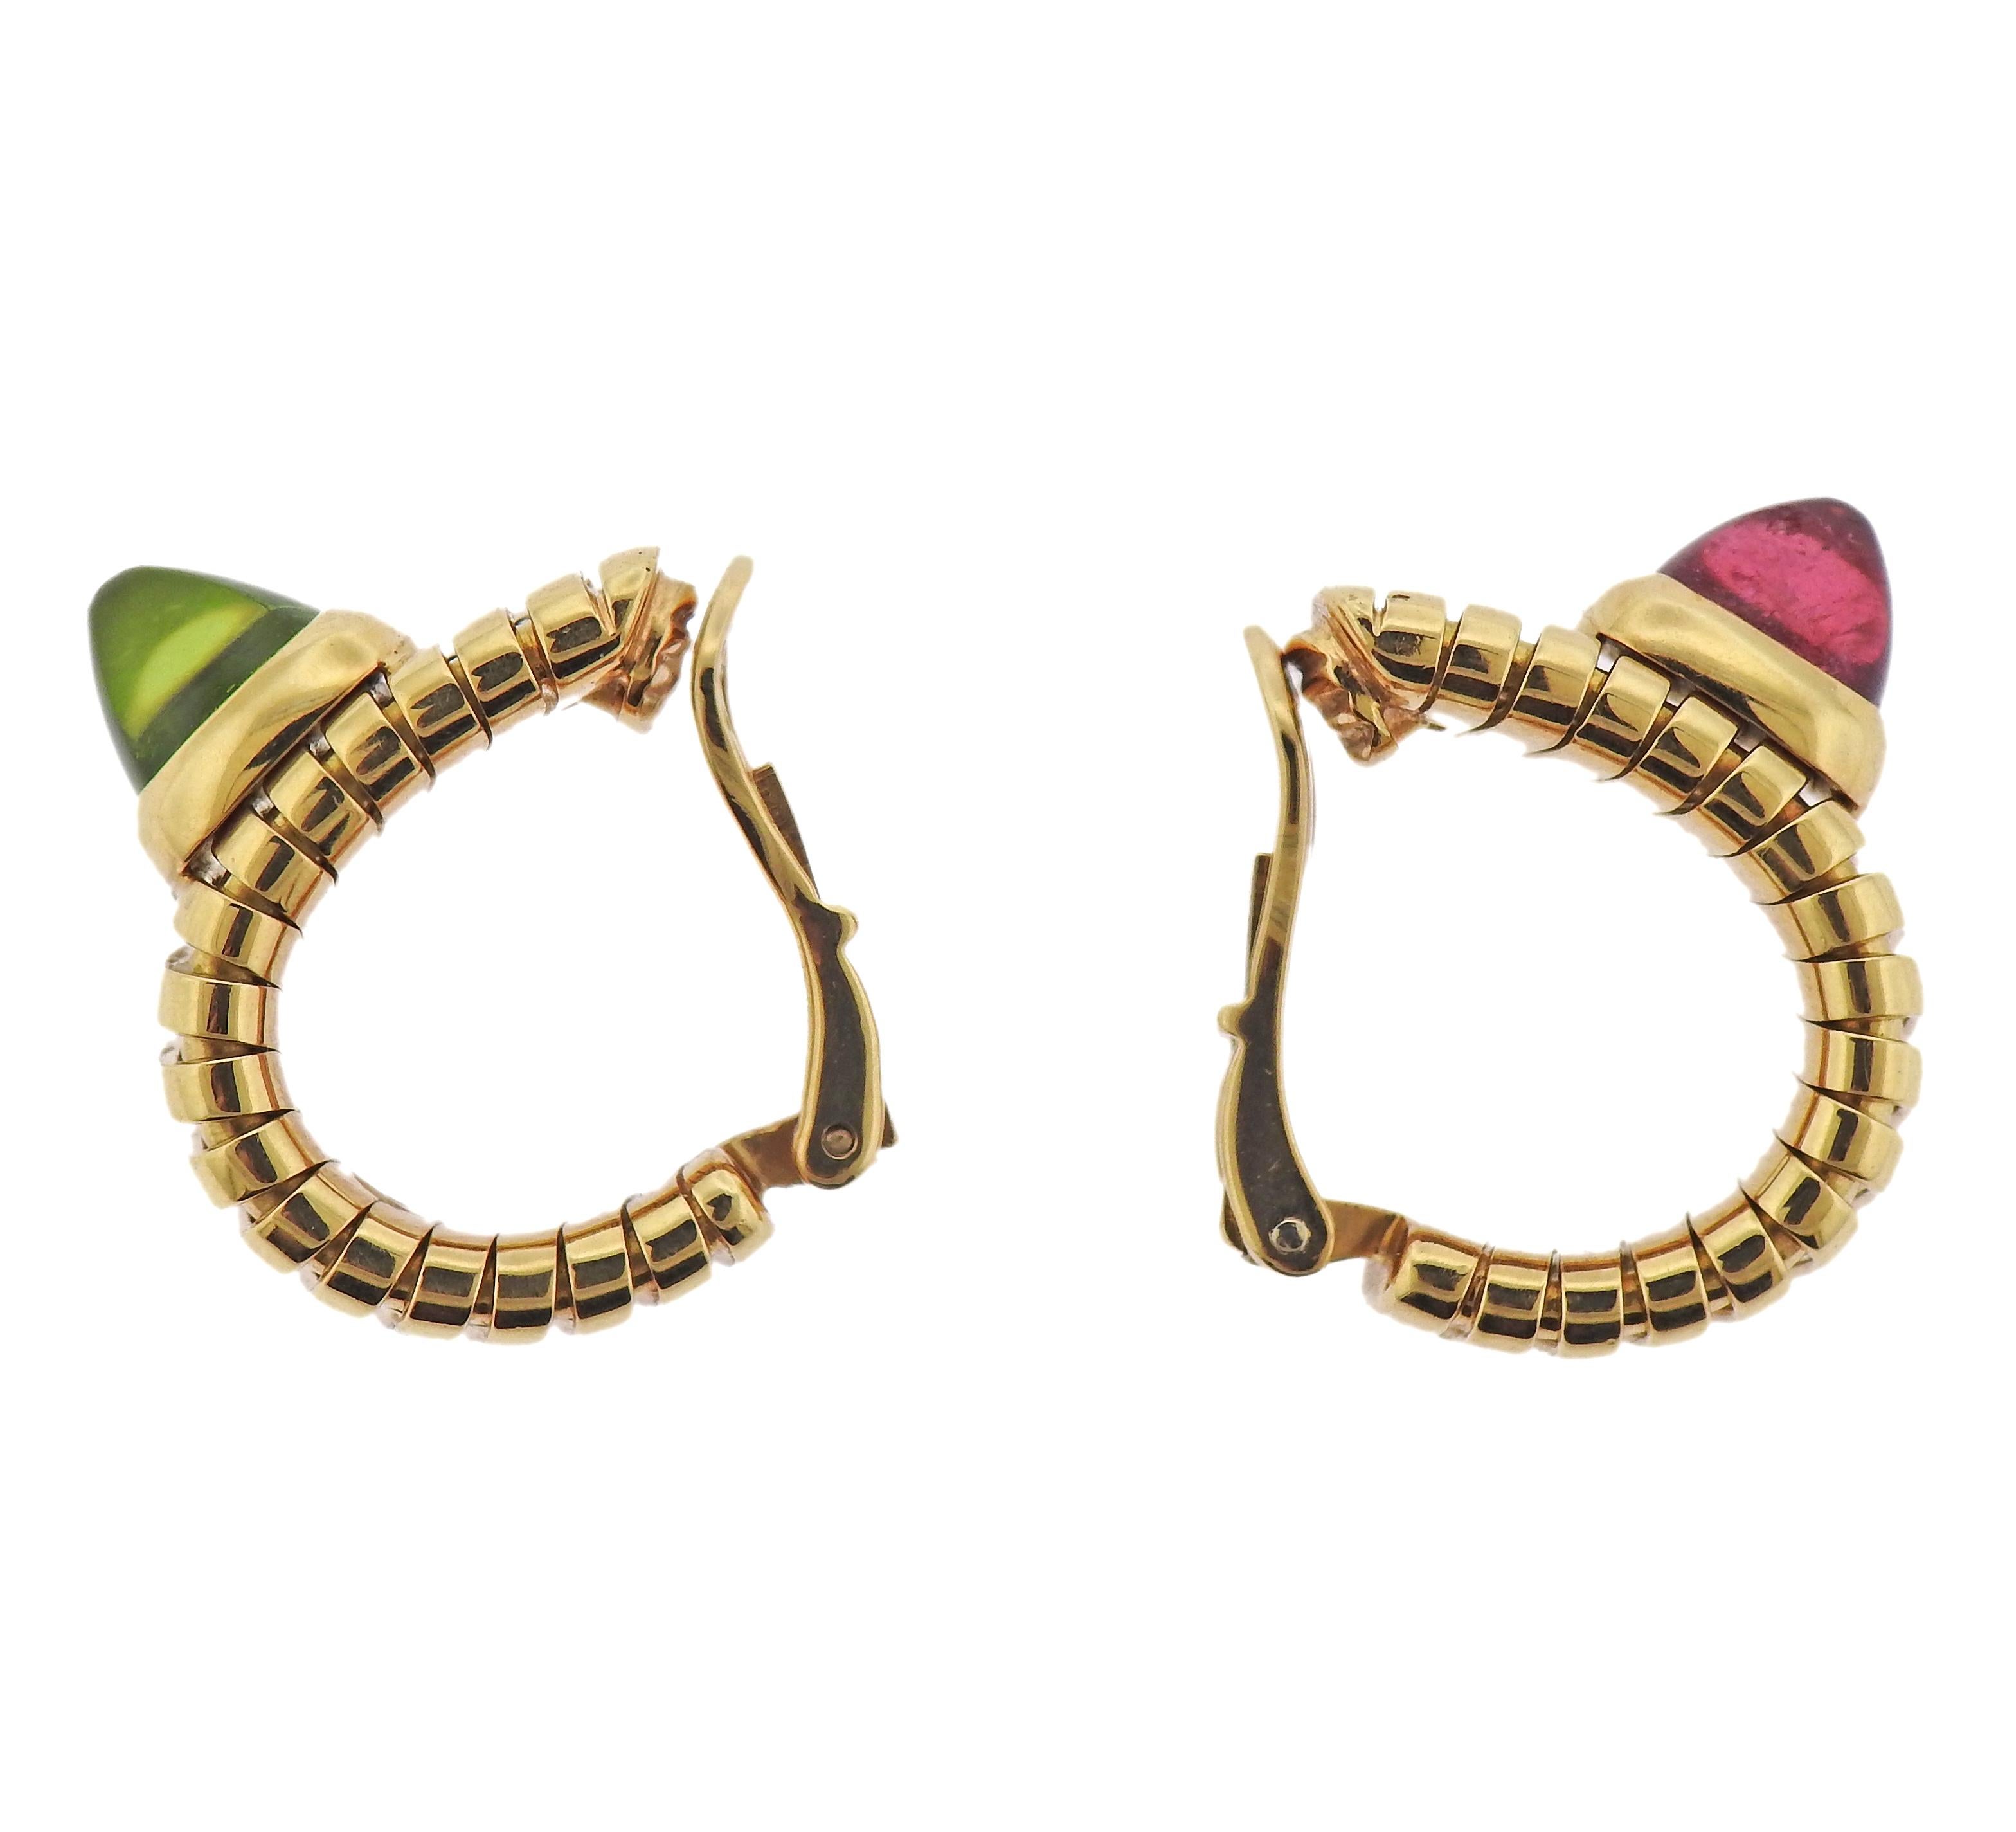 Pair of iconic Tubogas hoop earrings by Bvlgari, with sugarloaf cut pink tourmaline (small chip on the stone) and peridot. Earrings measure 20mm x 11mm. Marked: Bvlgari, 750, Italian mark, BA1414. Weight - 26.9 grams.